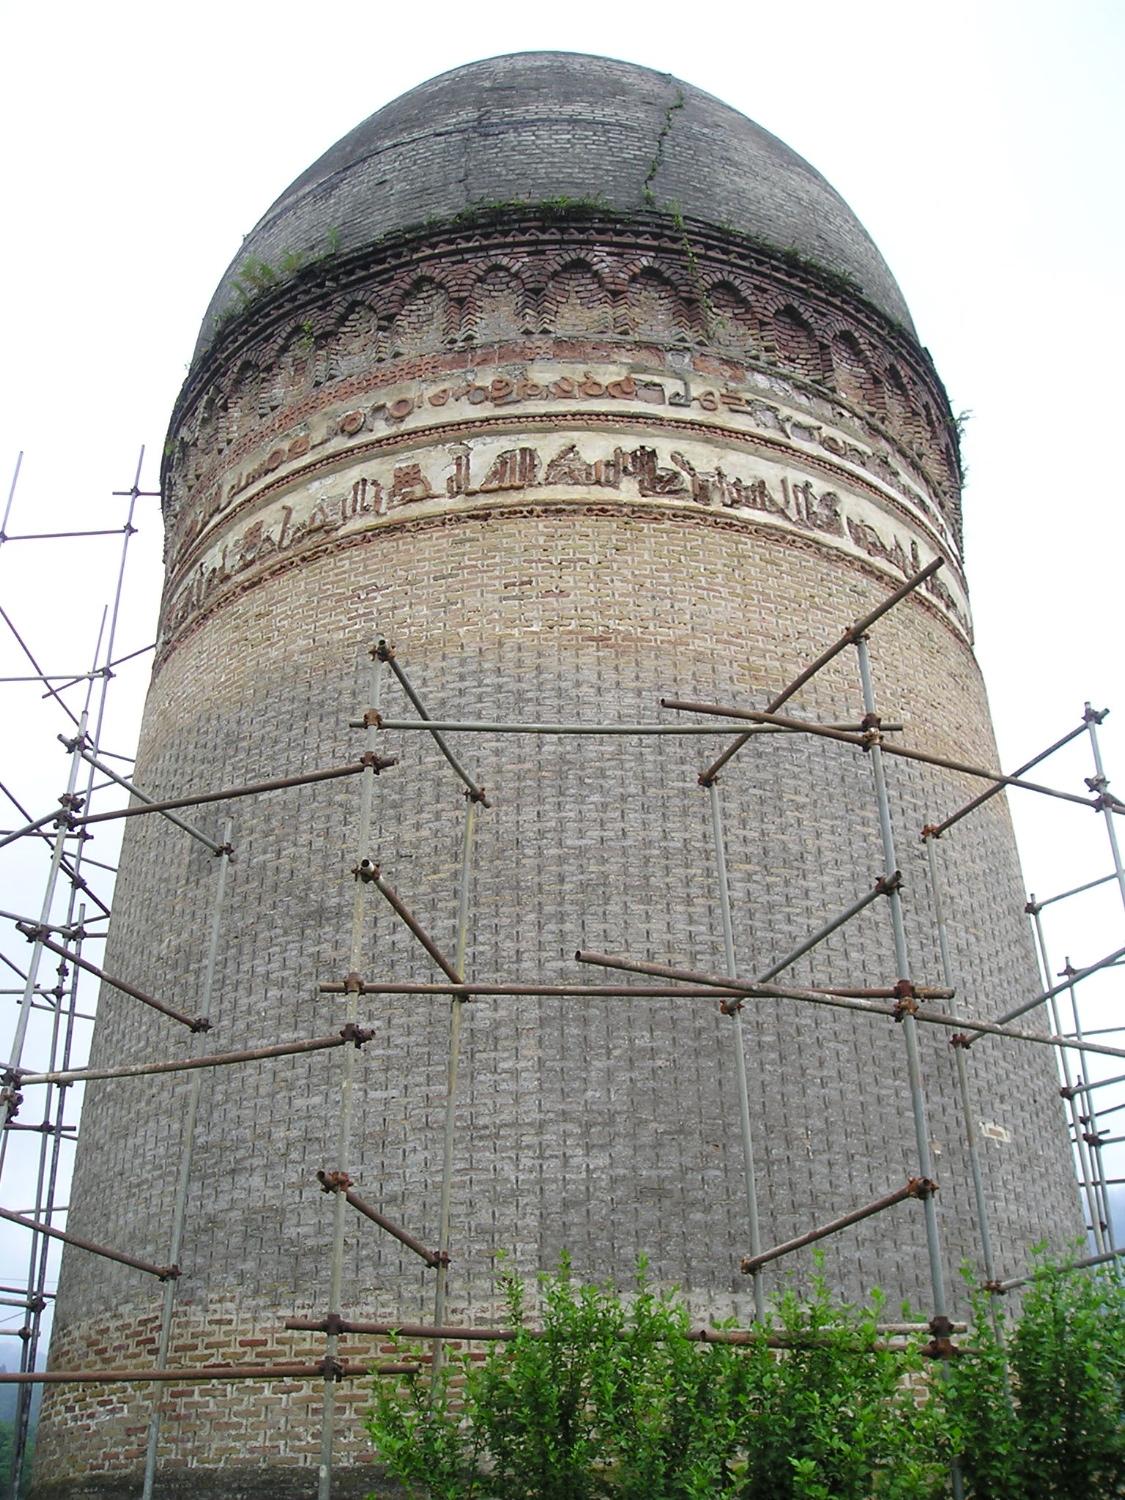 Exterior view showing decorative bands and dome, with scaffolding set up for restoration